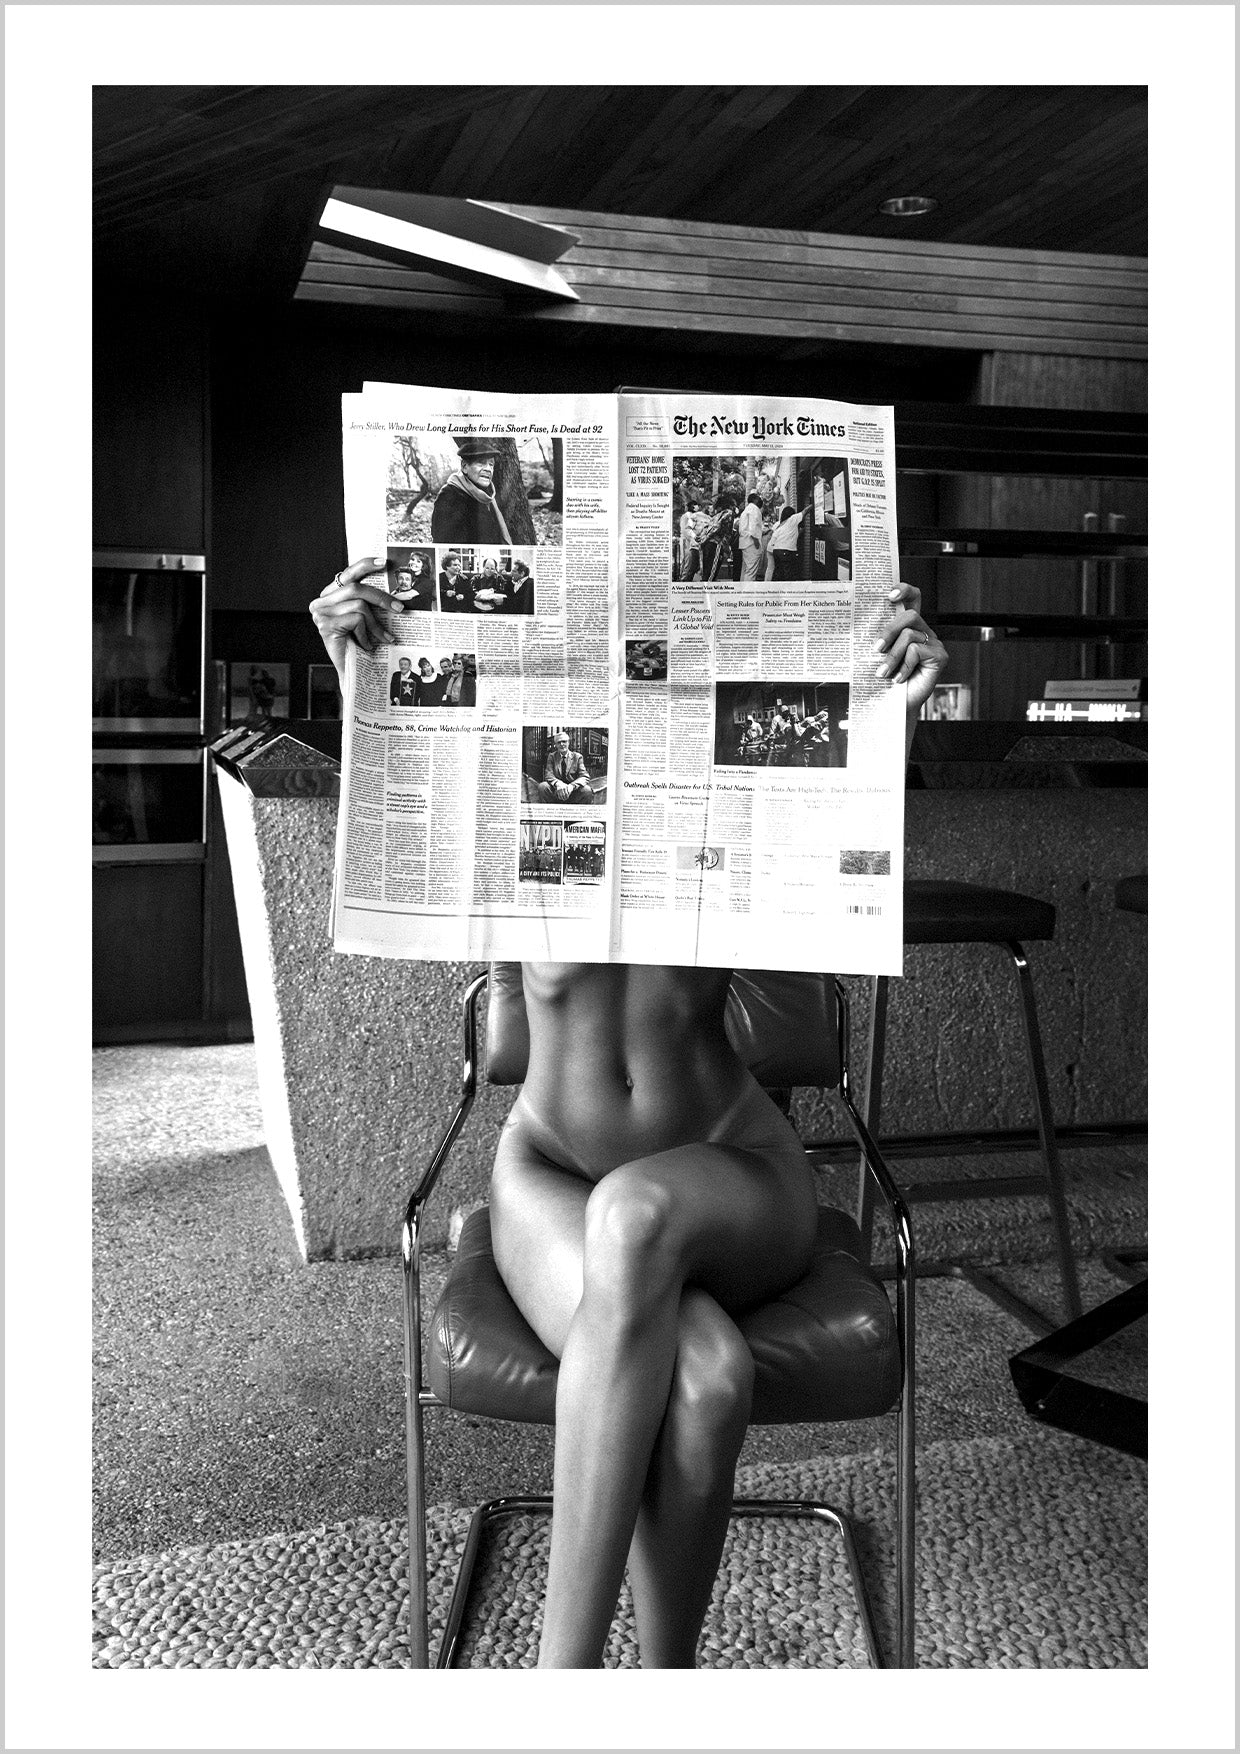 Photograph of a nude woman sitting on dining table reading newspaper